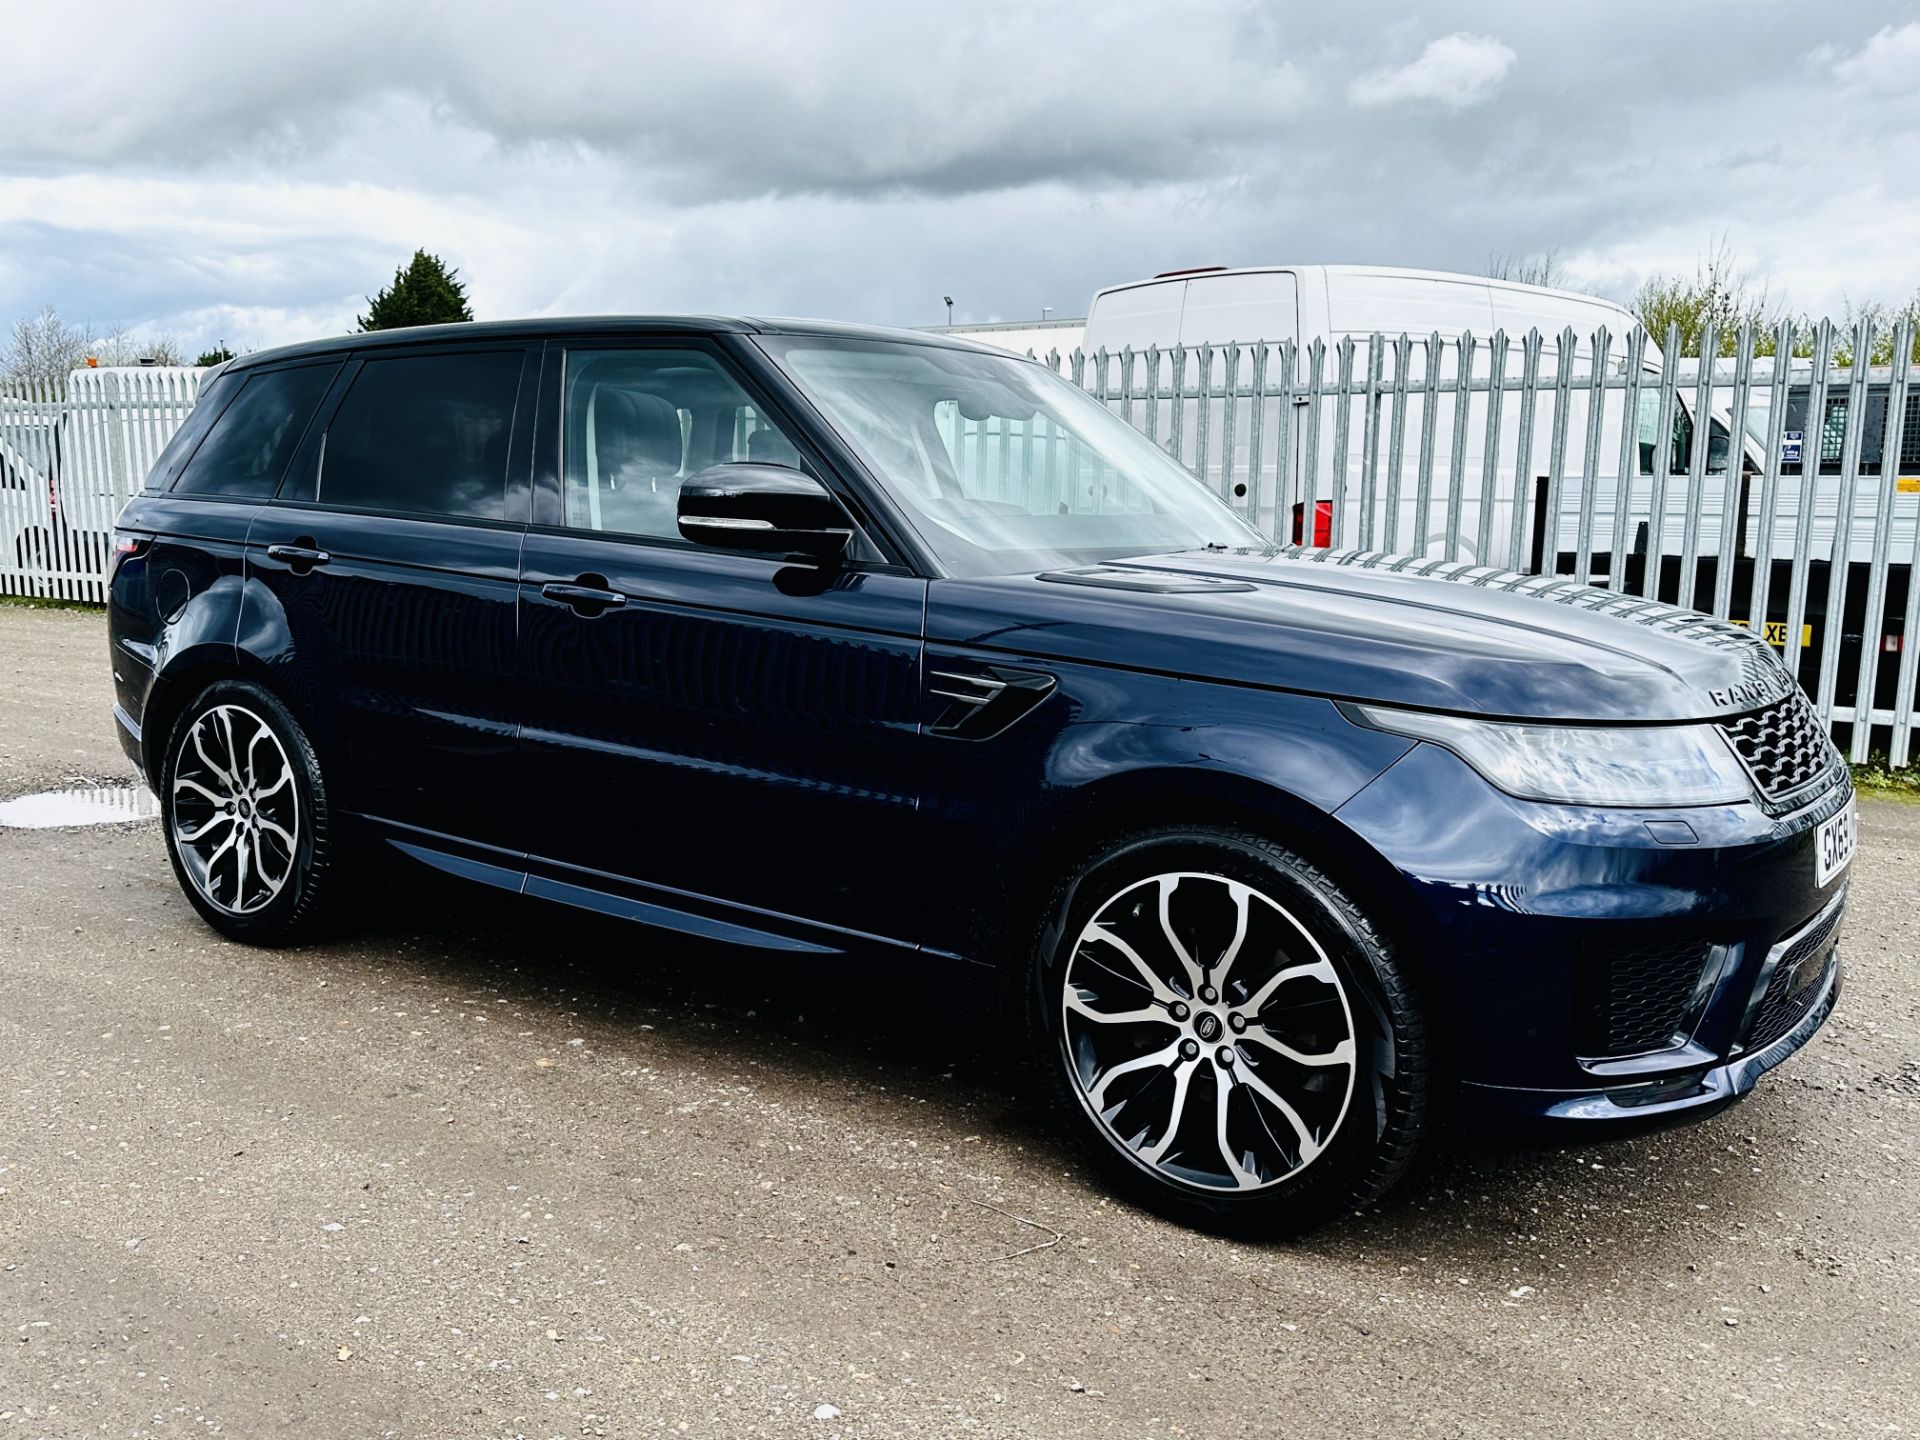 **ON SALE** Land Rover Range Rover Sport 3.0 SDV6 HSE DYNAMIC 2020 '69 Reg'- Only 47544 Miles - Image 2 of 30